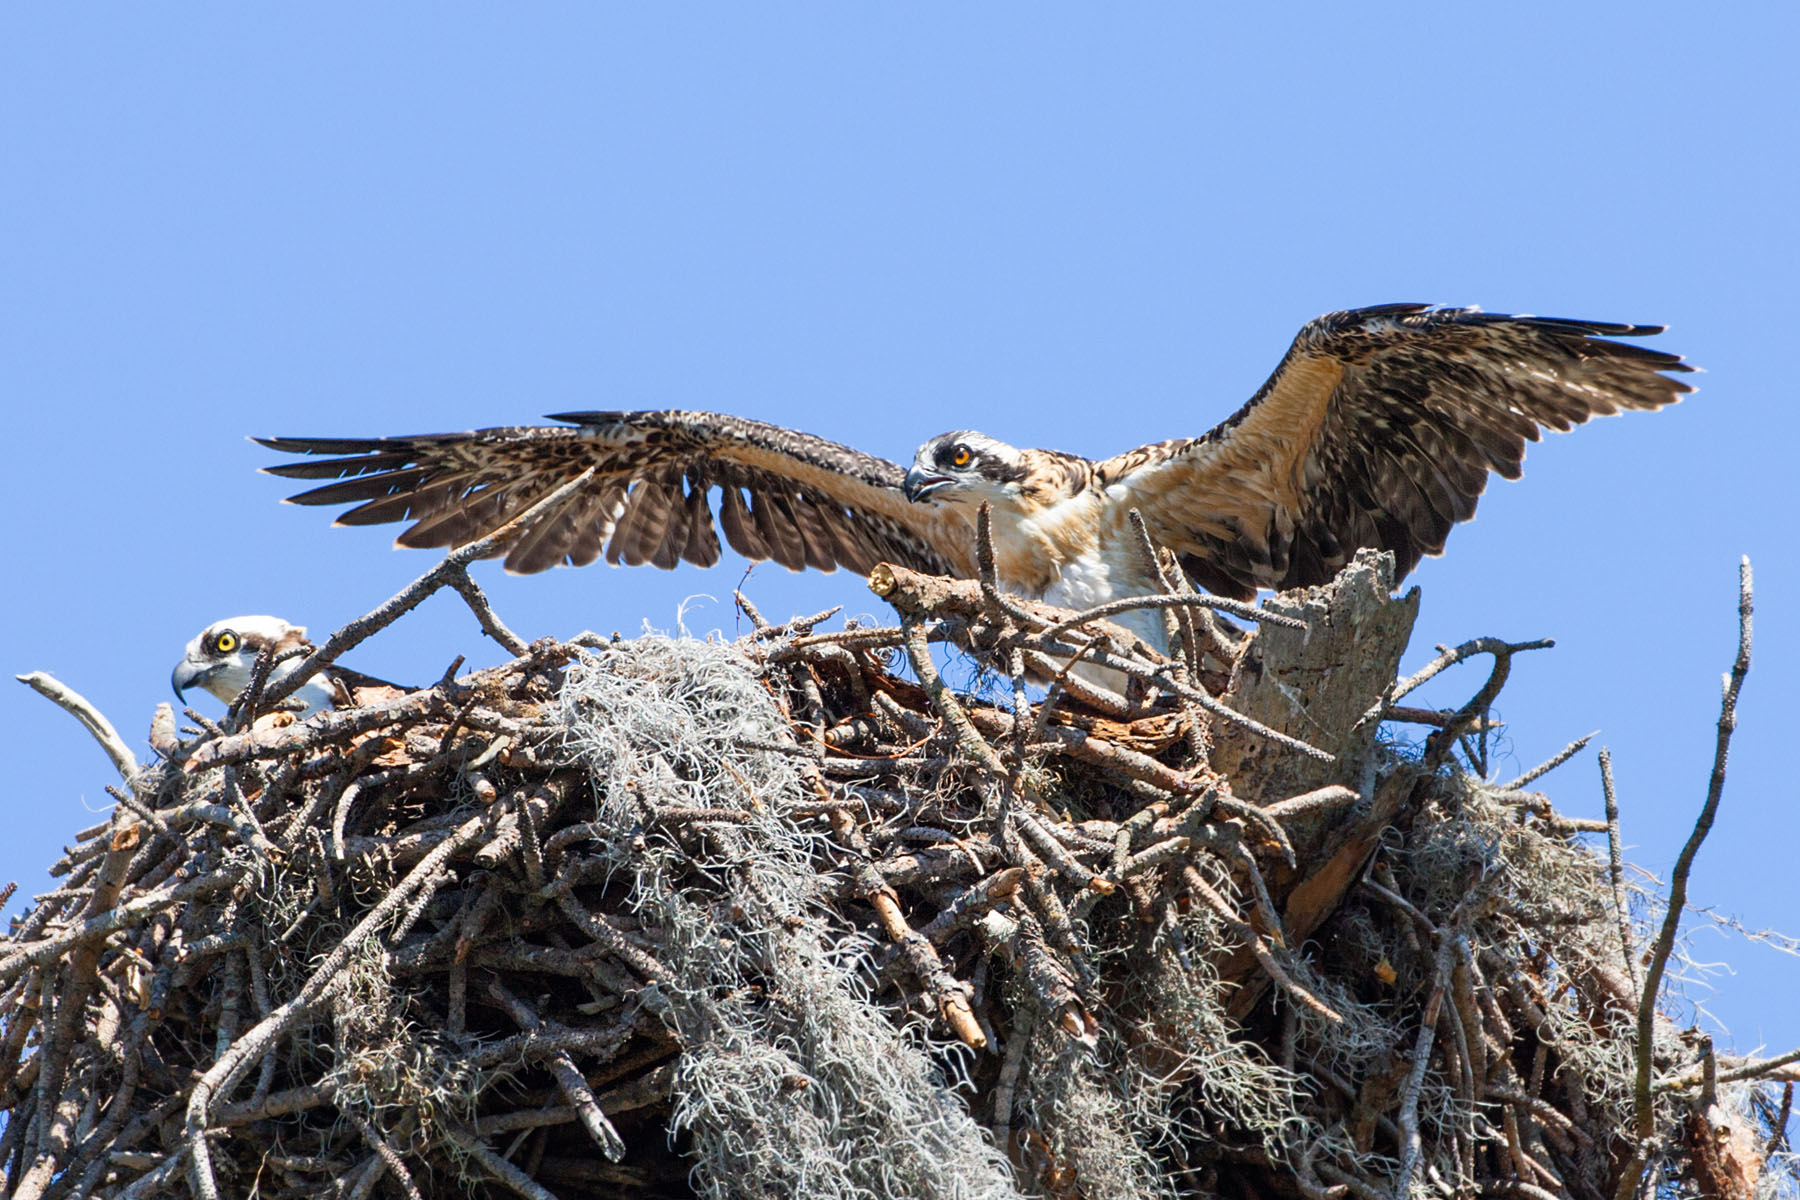 Young osprey tests its wings, Honeymoon Island State Park, Florida.  Click for next photo.